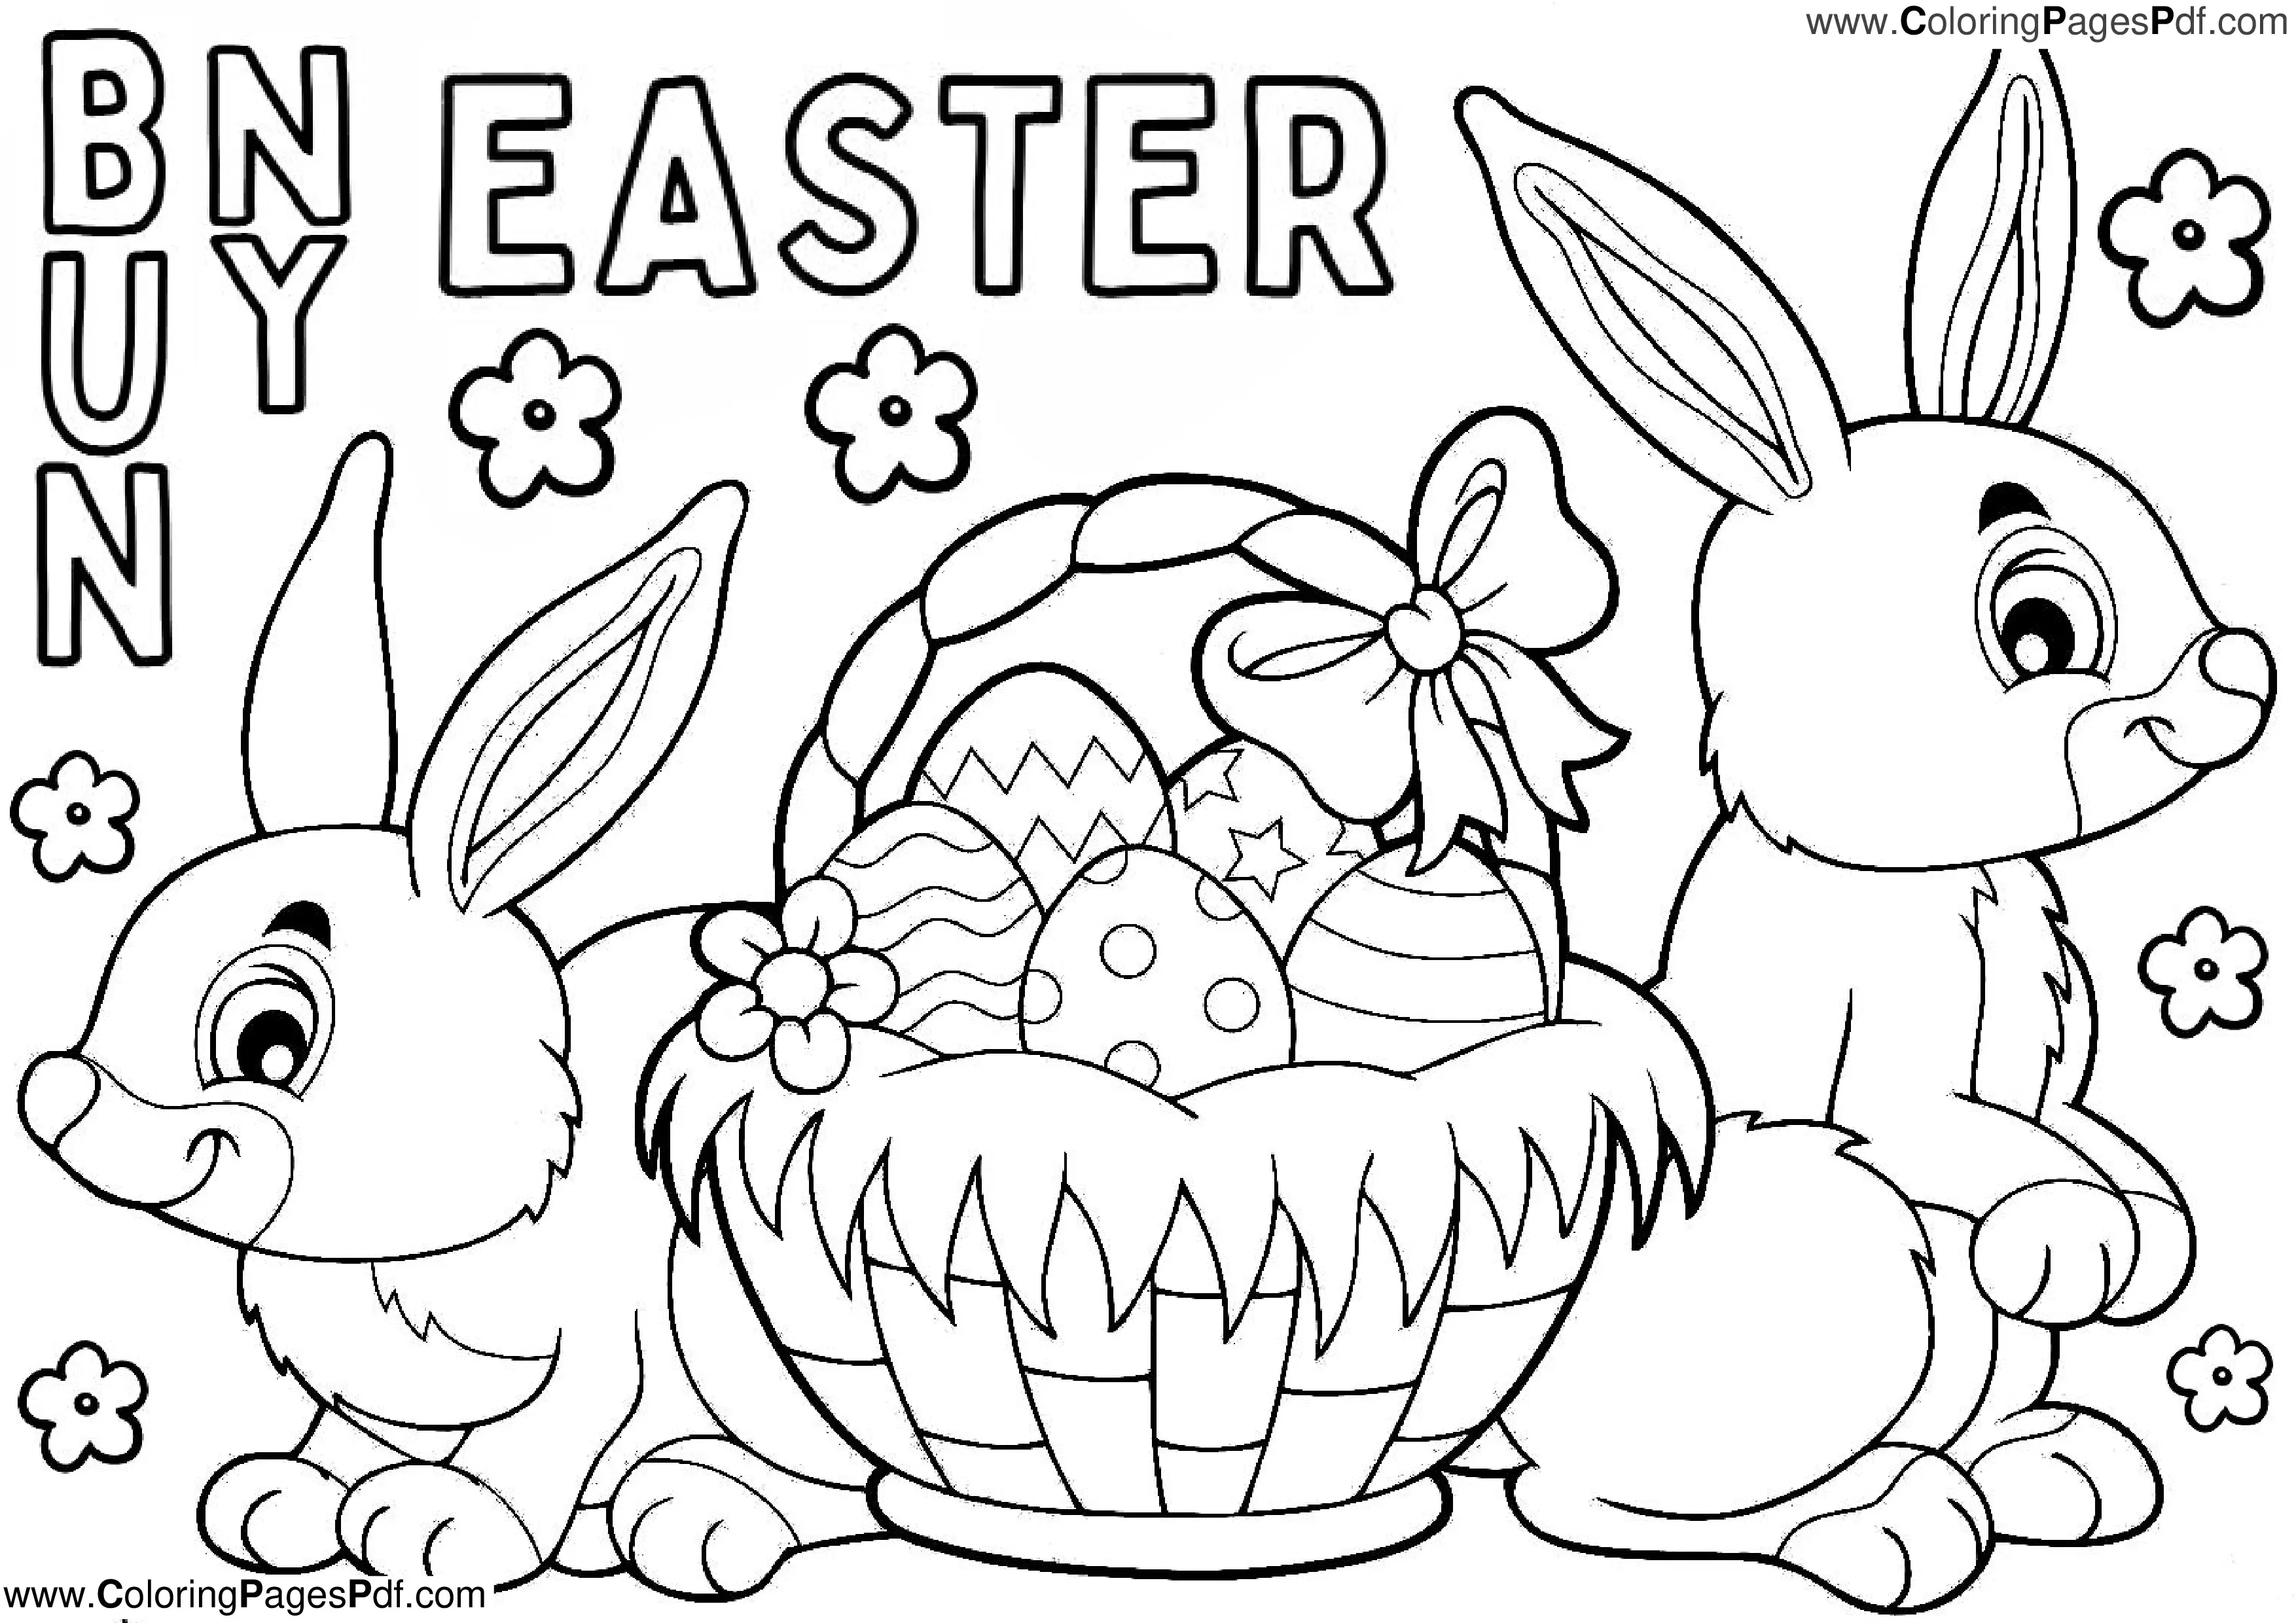 Easter bunny coloring pages pdf